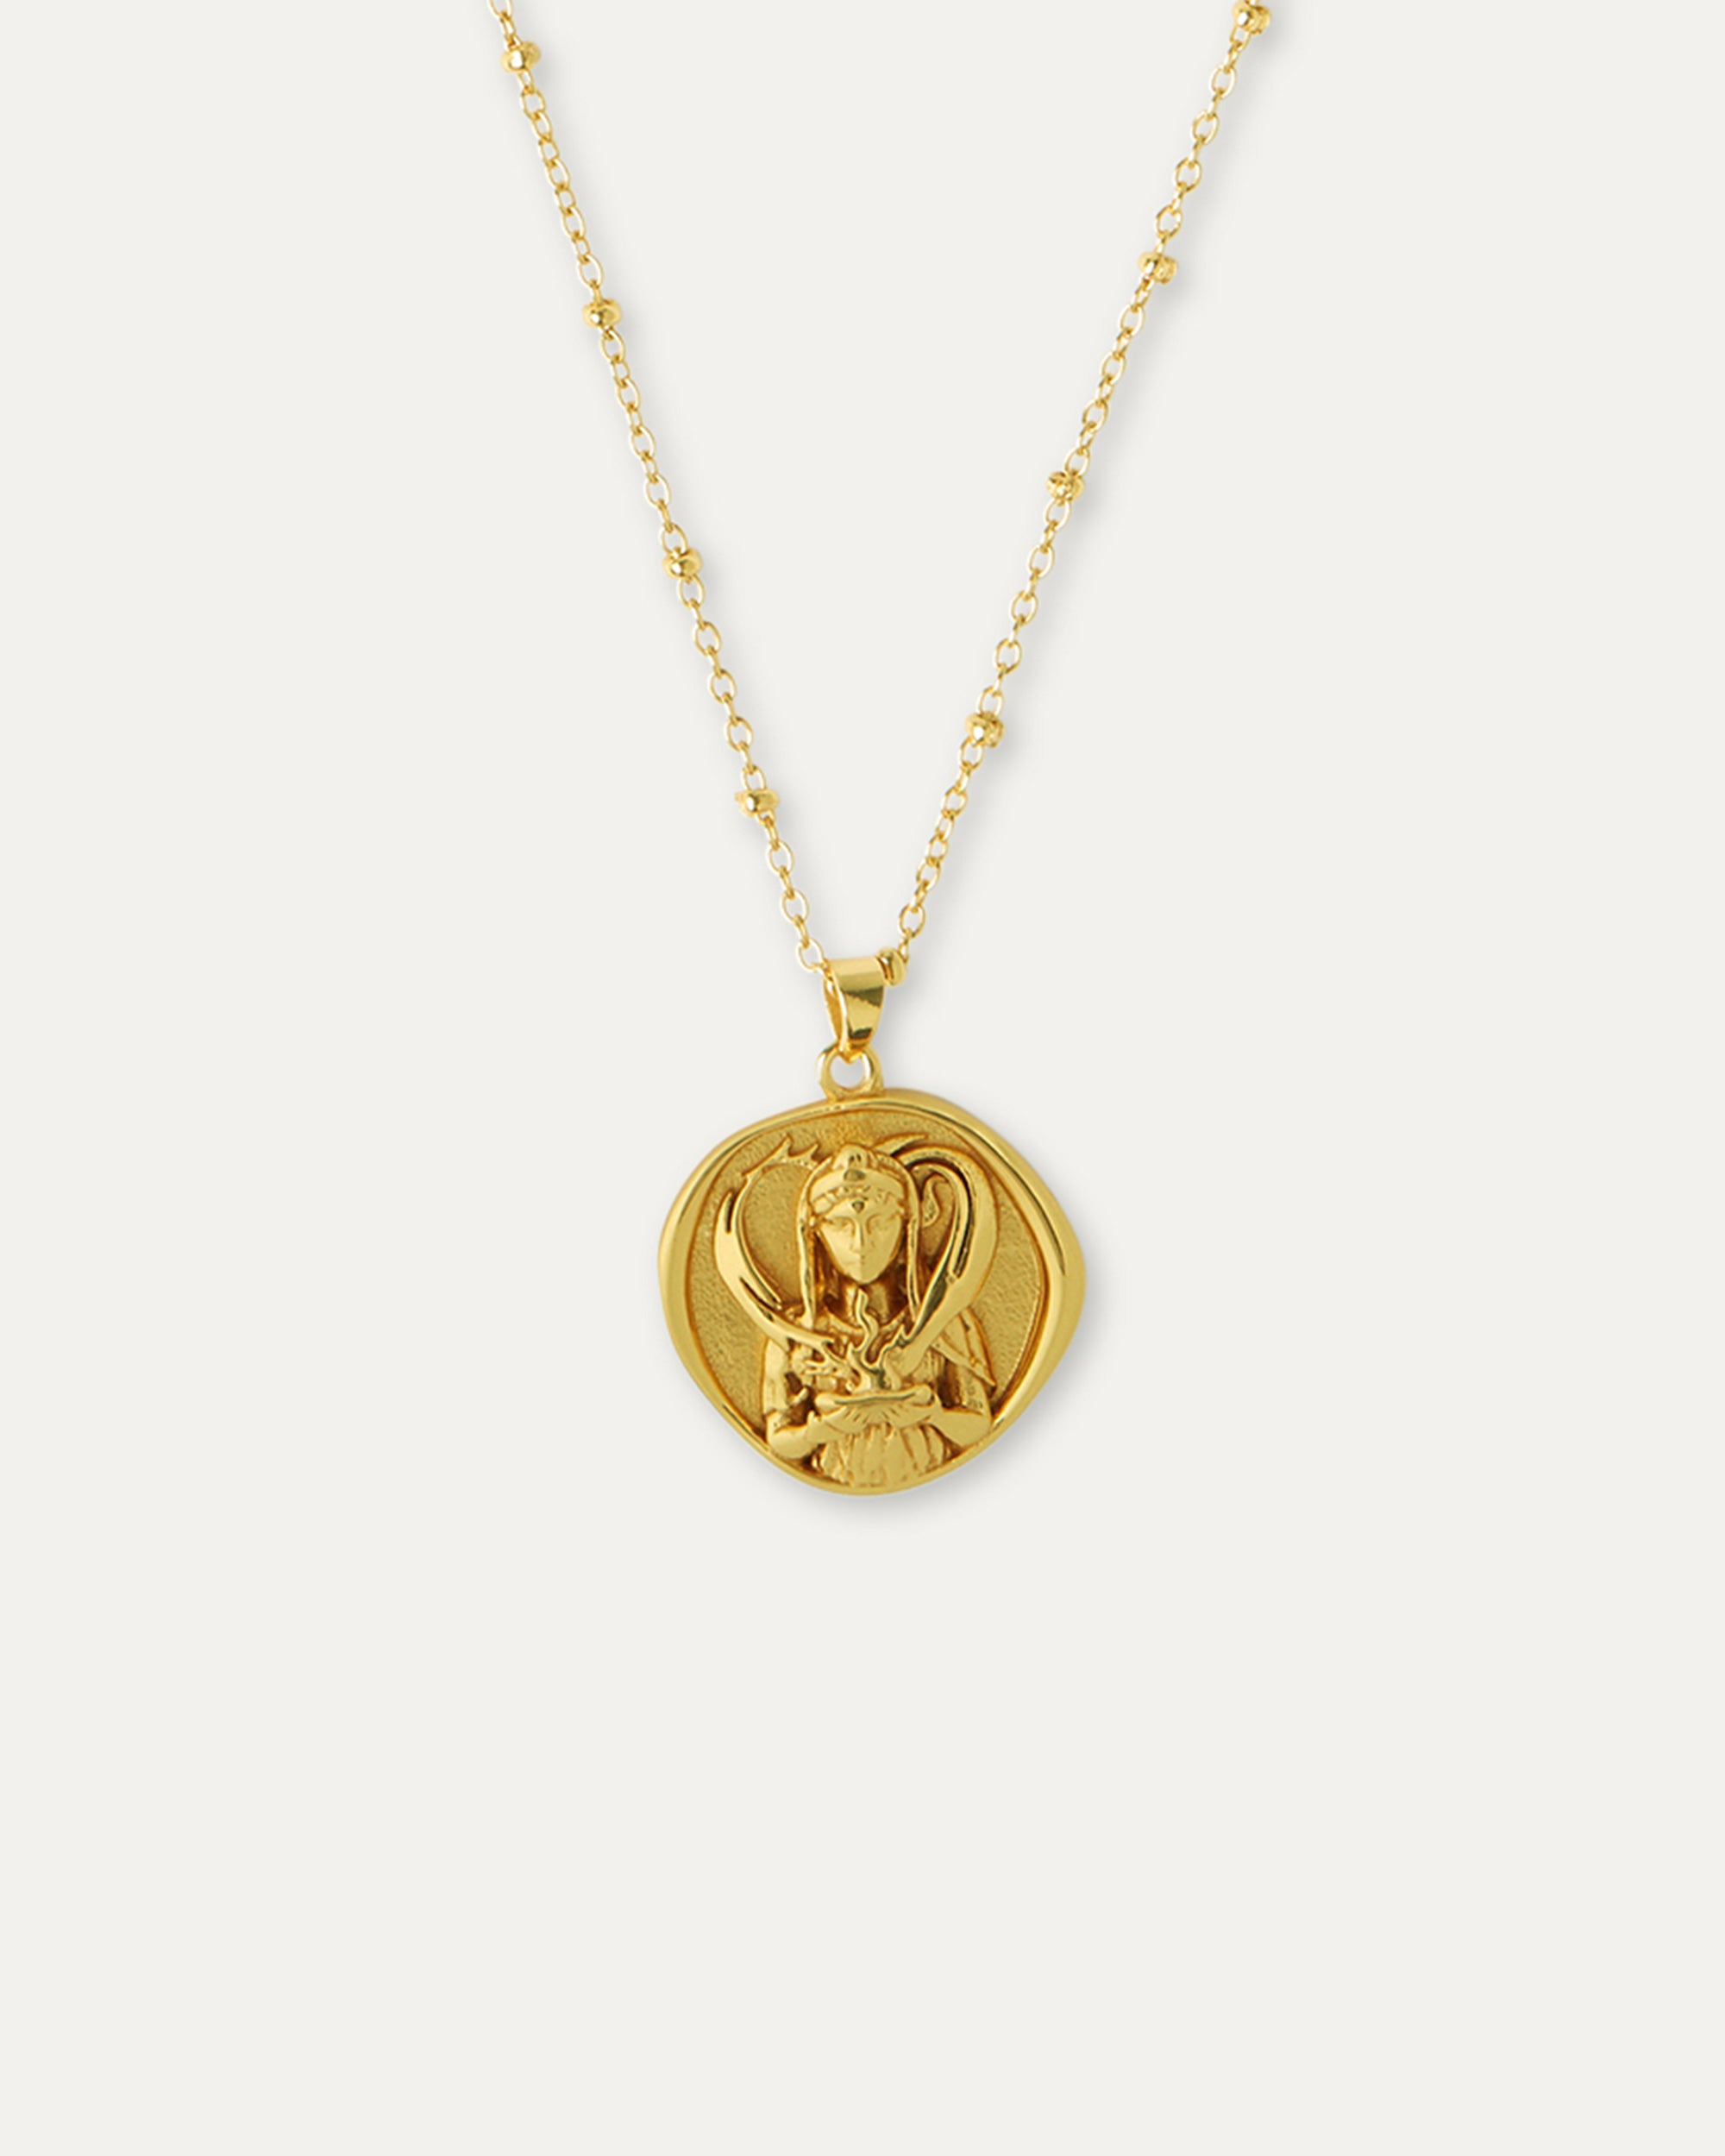 Goddess Hestia Pendant Necklace | Sustainable Jewellery by Ottoman Hands